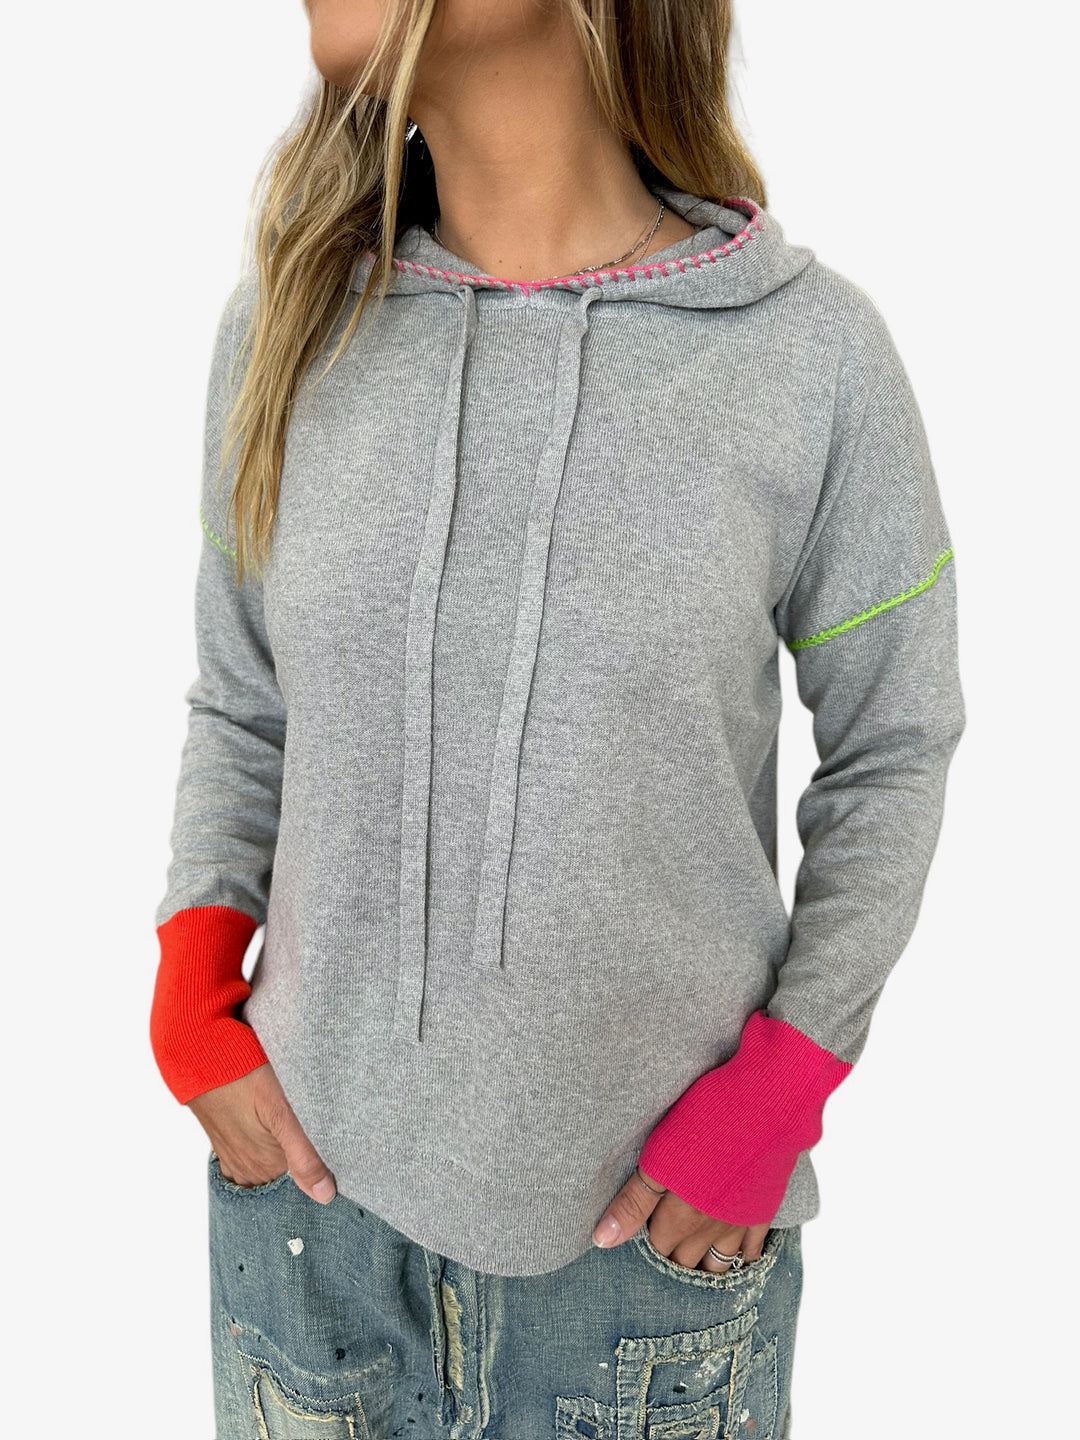 WHIPSTITCH HOODIE - HEATHER - Kingfisher Road - Online Boutique